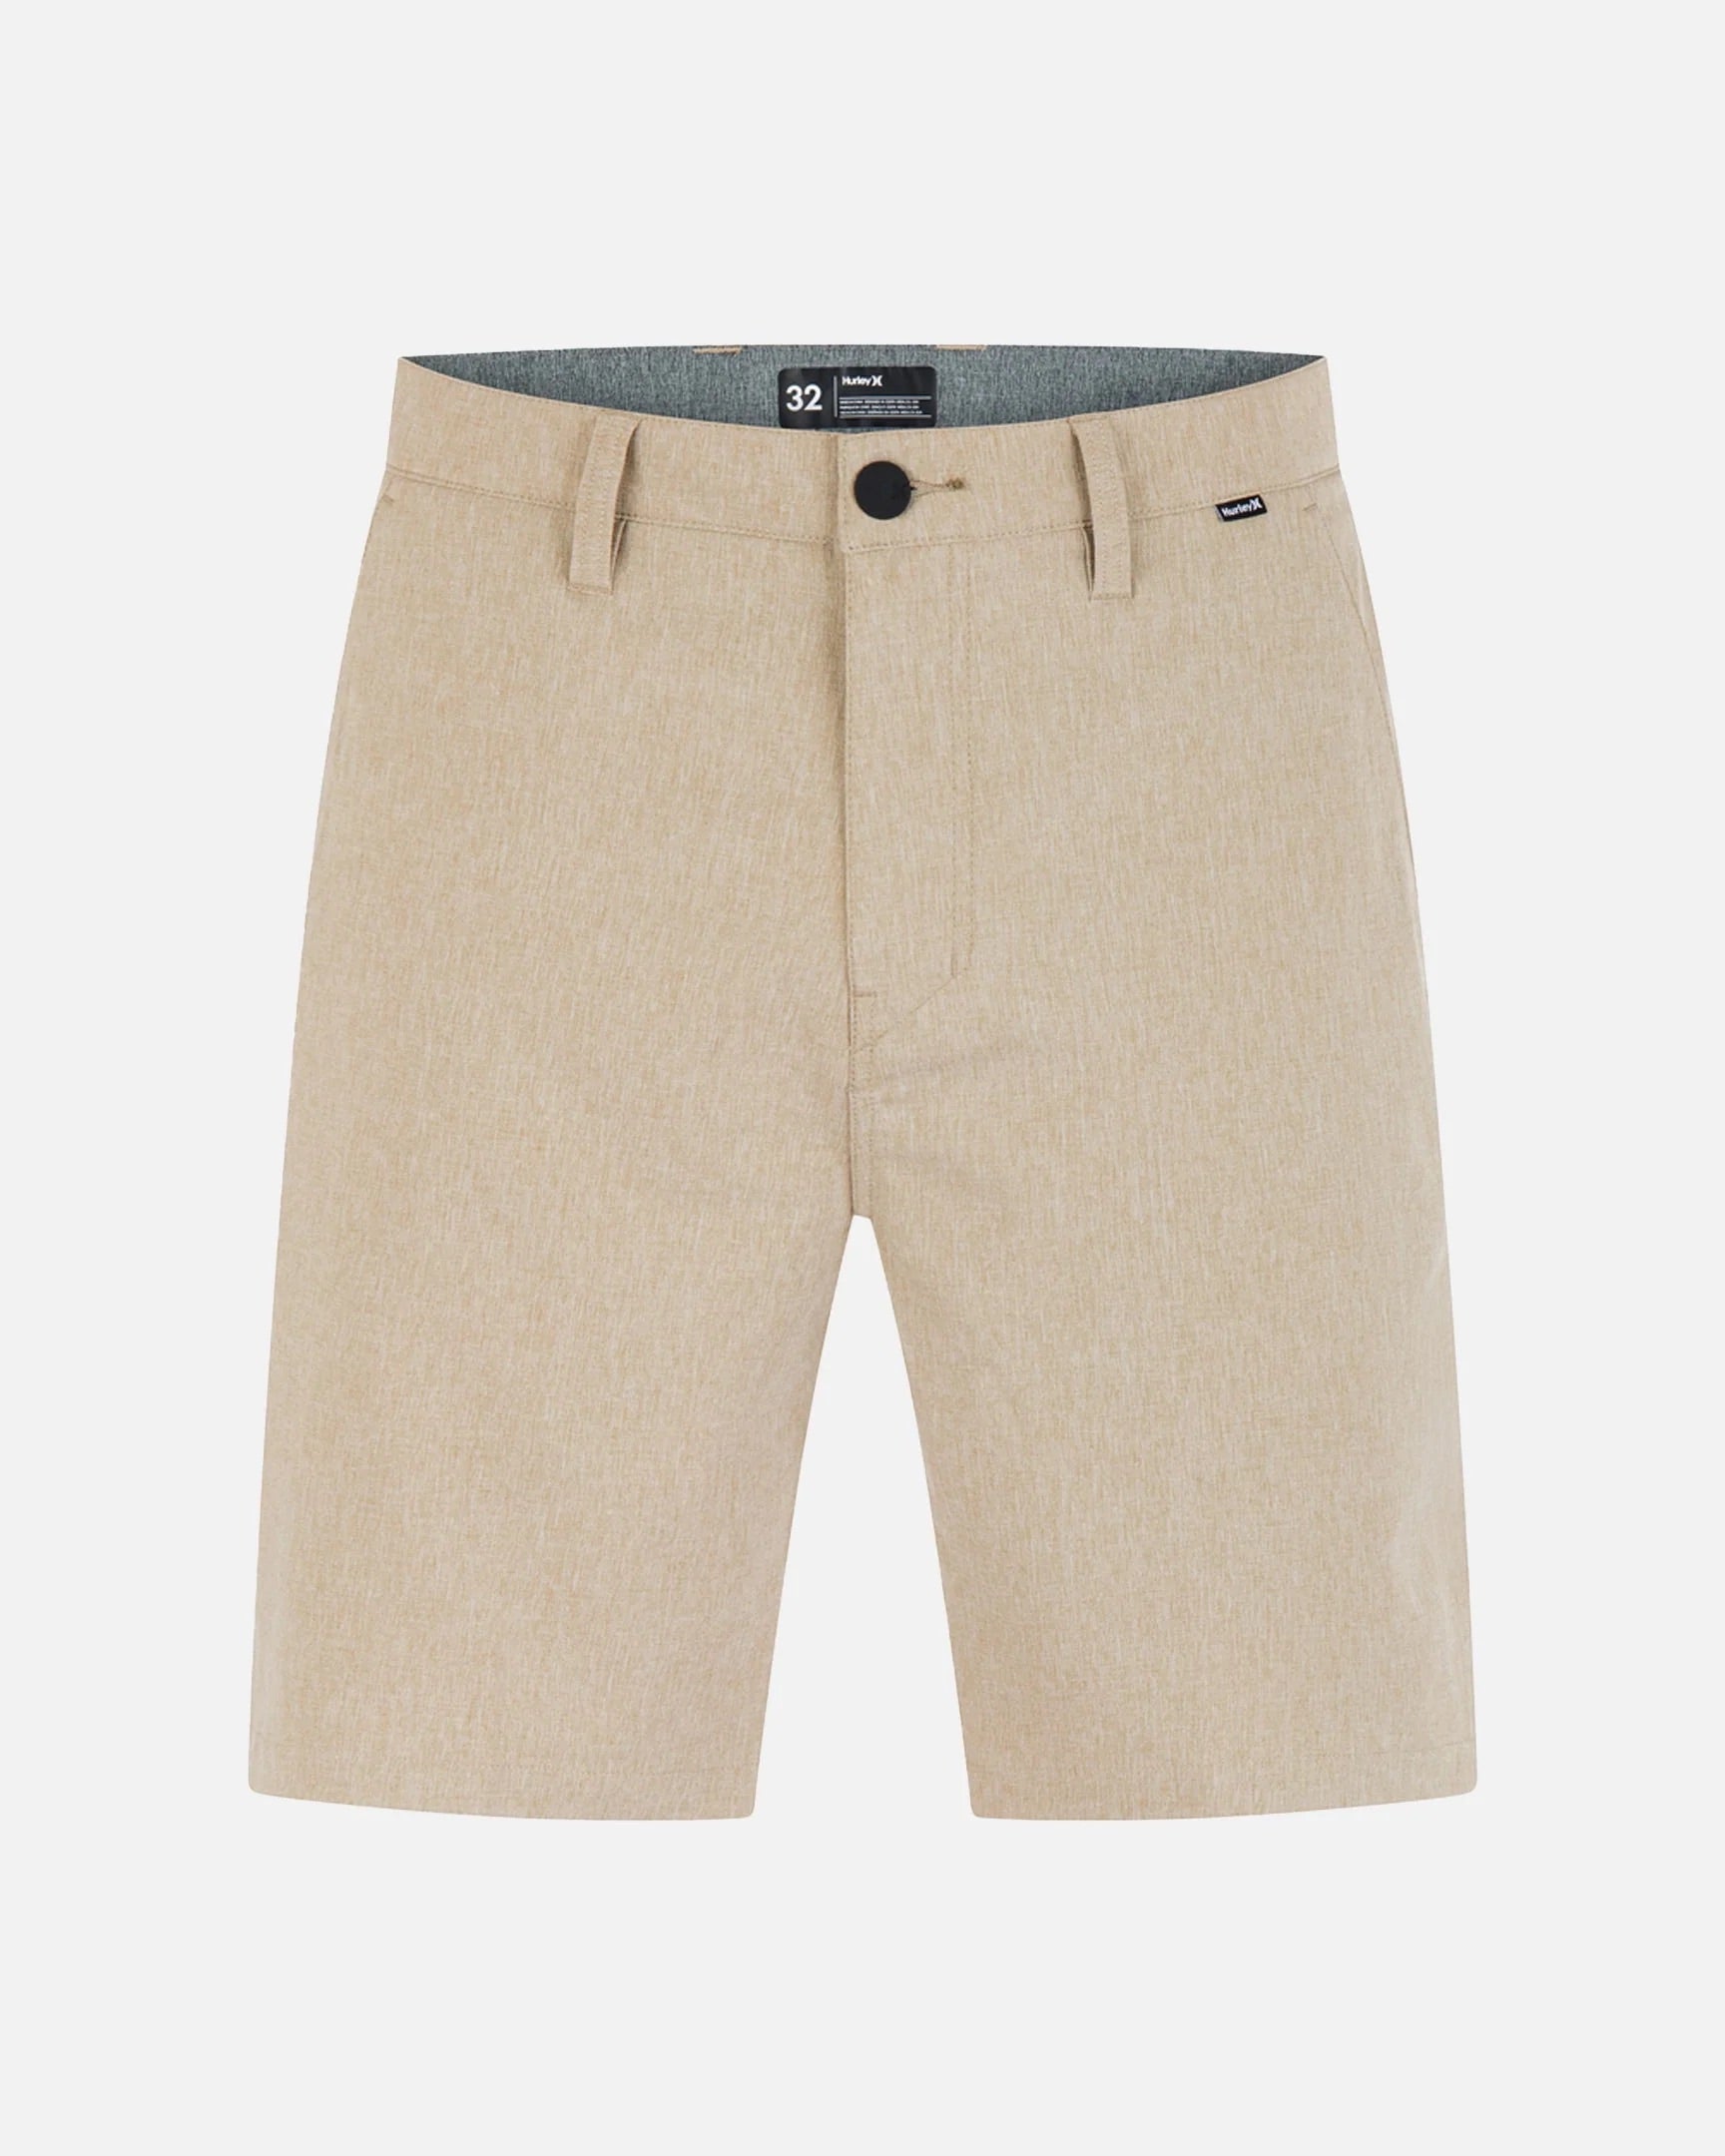 Stay active with the Hurley Phantom Walkshort 18". Combining a 4-way stretch and quick dry capabilities, these shorts offer unrestricted mobility and durability on land or water.